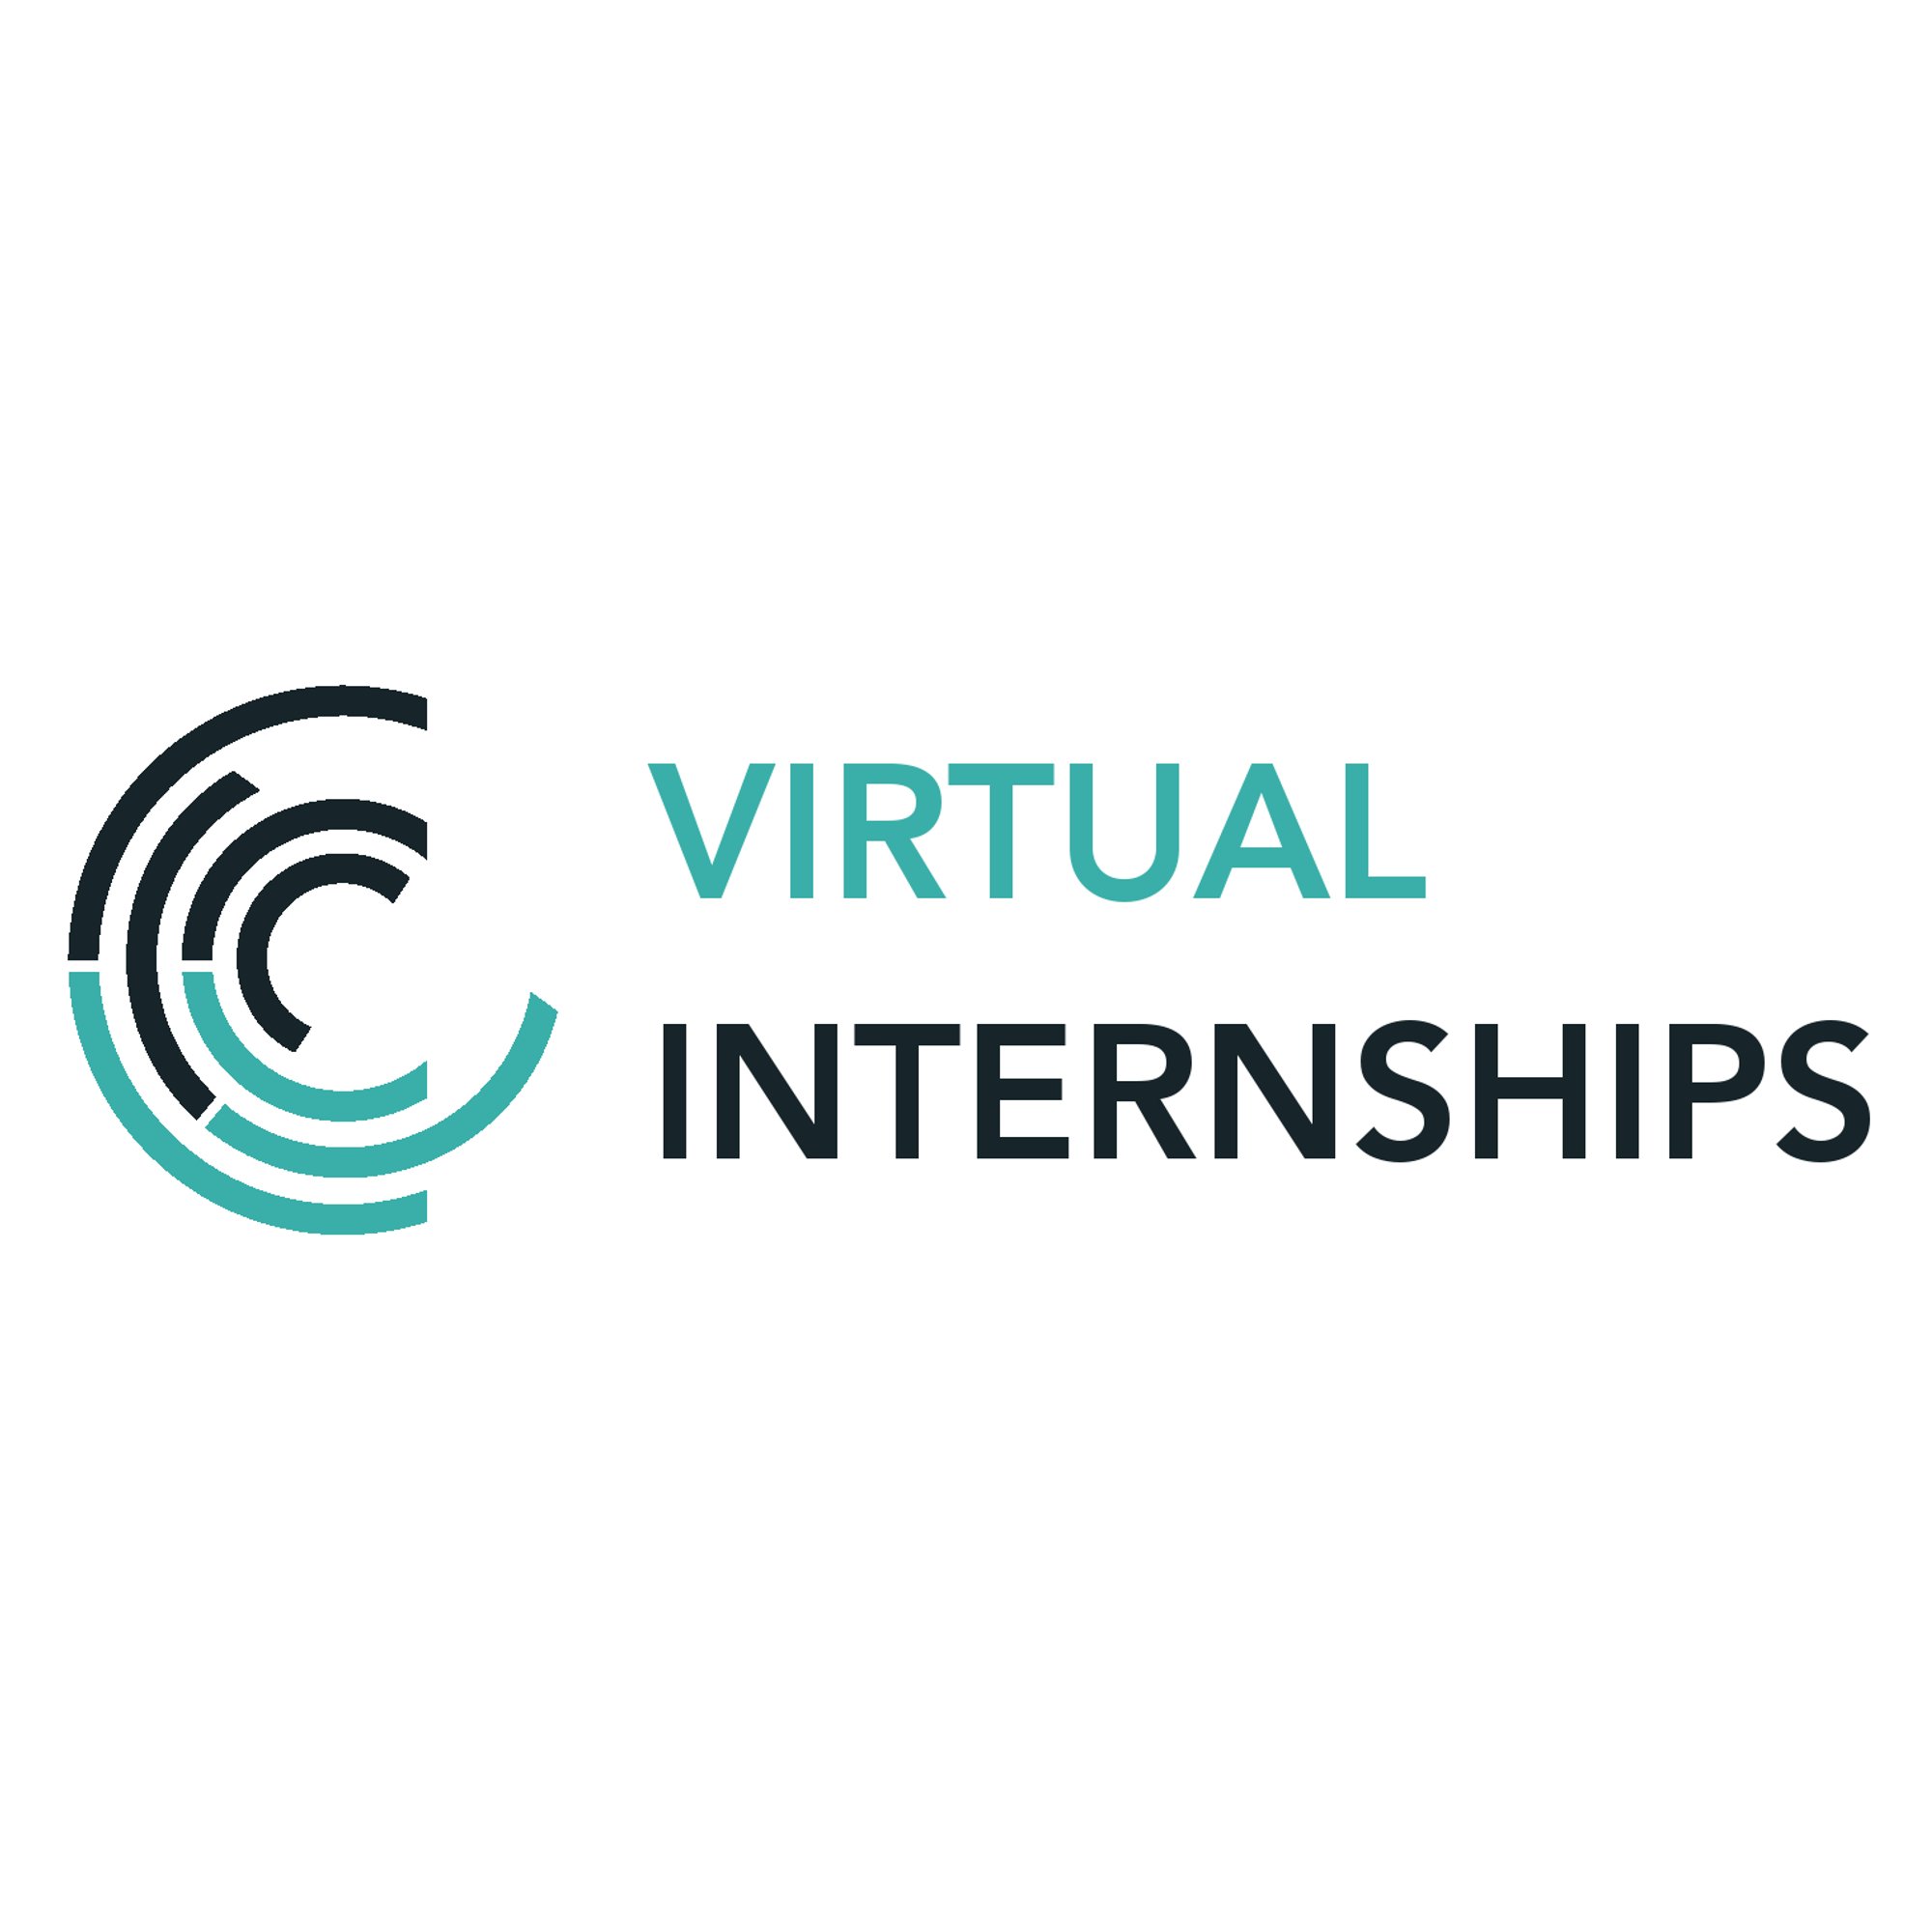 The largest and fastest-growing network of internship opportunities to guarantee all individuals a transformative work experience.  #futureofwork #remotework